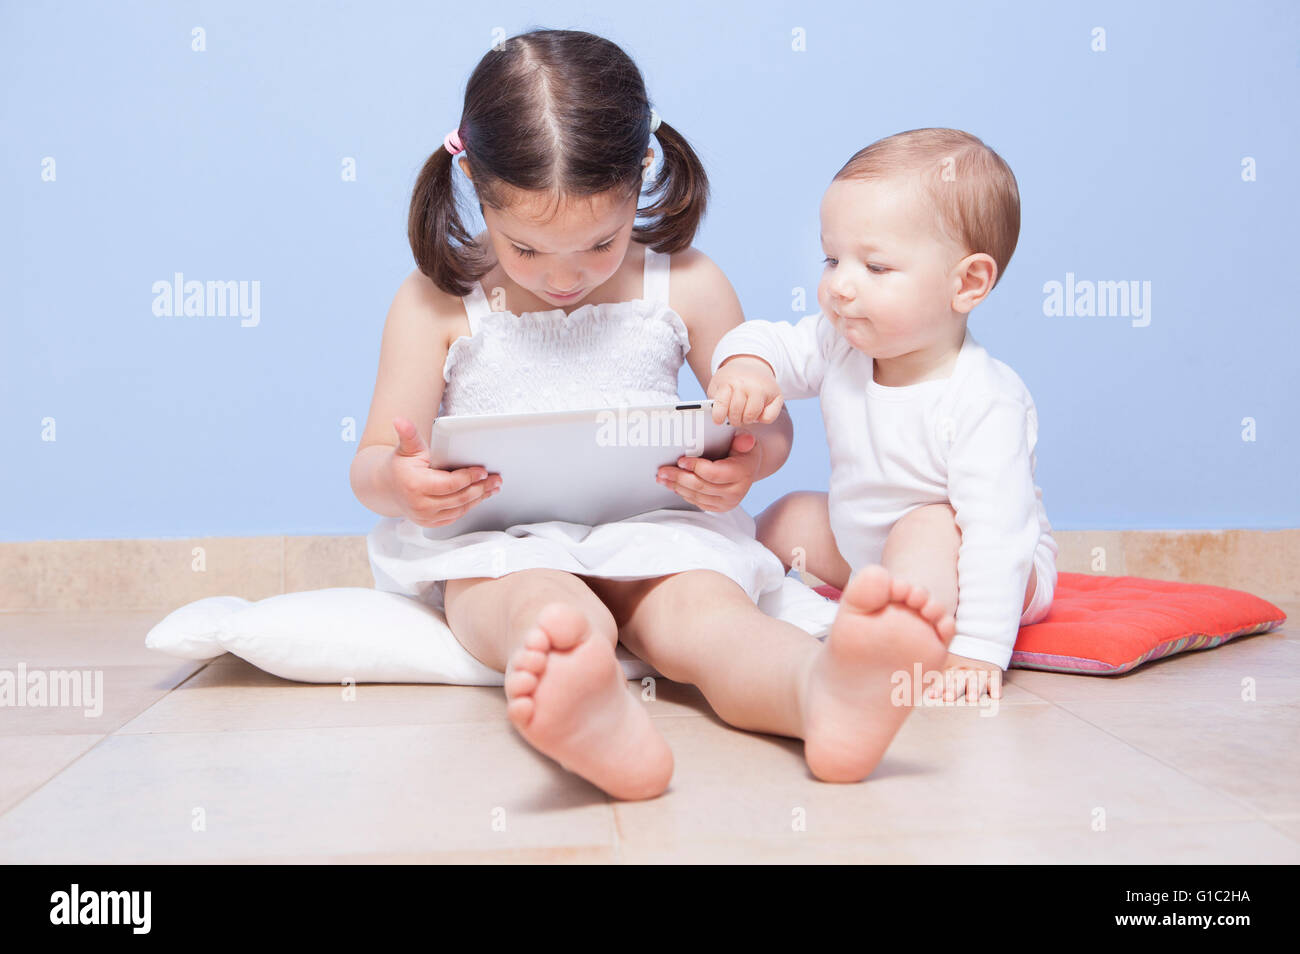 Baby boy discovering with her sister a tablet pc Stock Photo